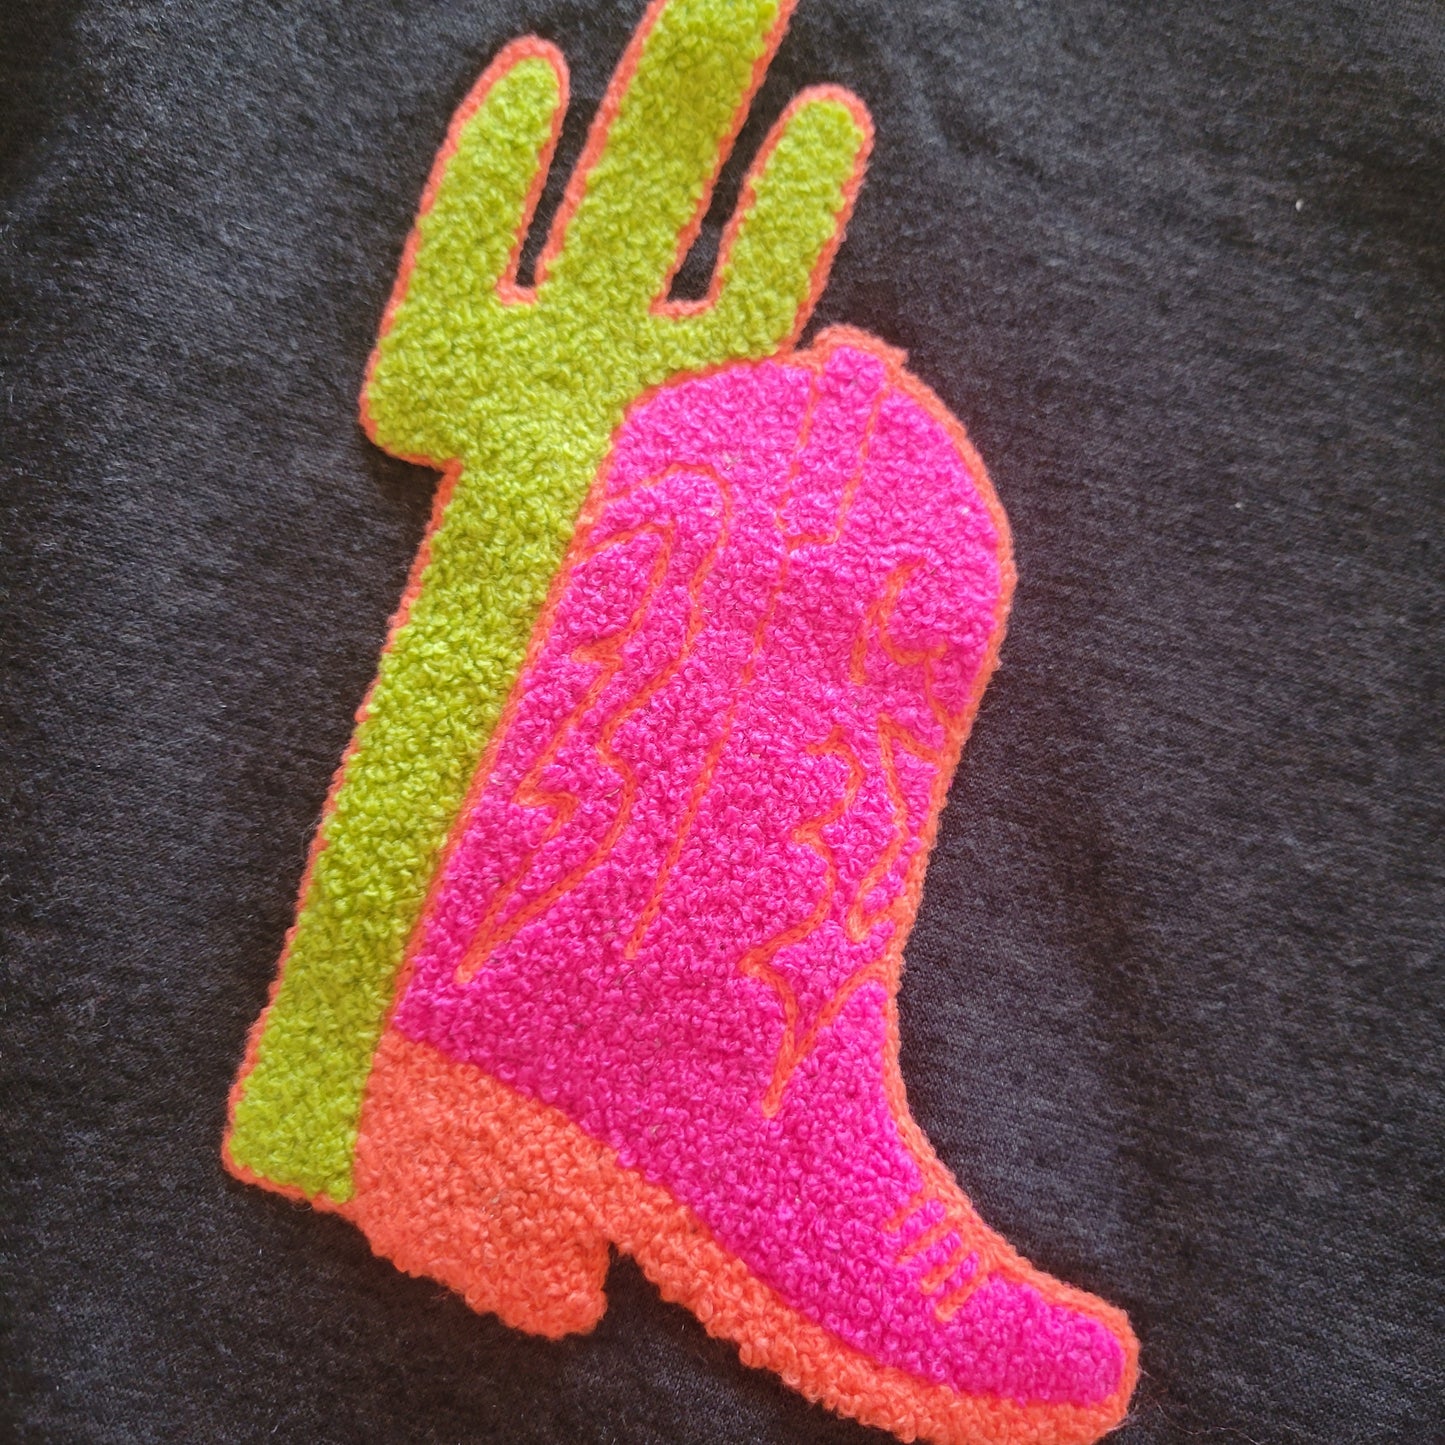 Neon Boot Scoot Kids Pullover